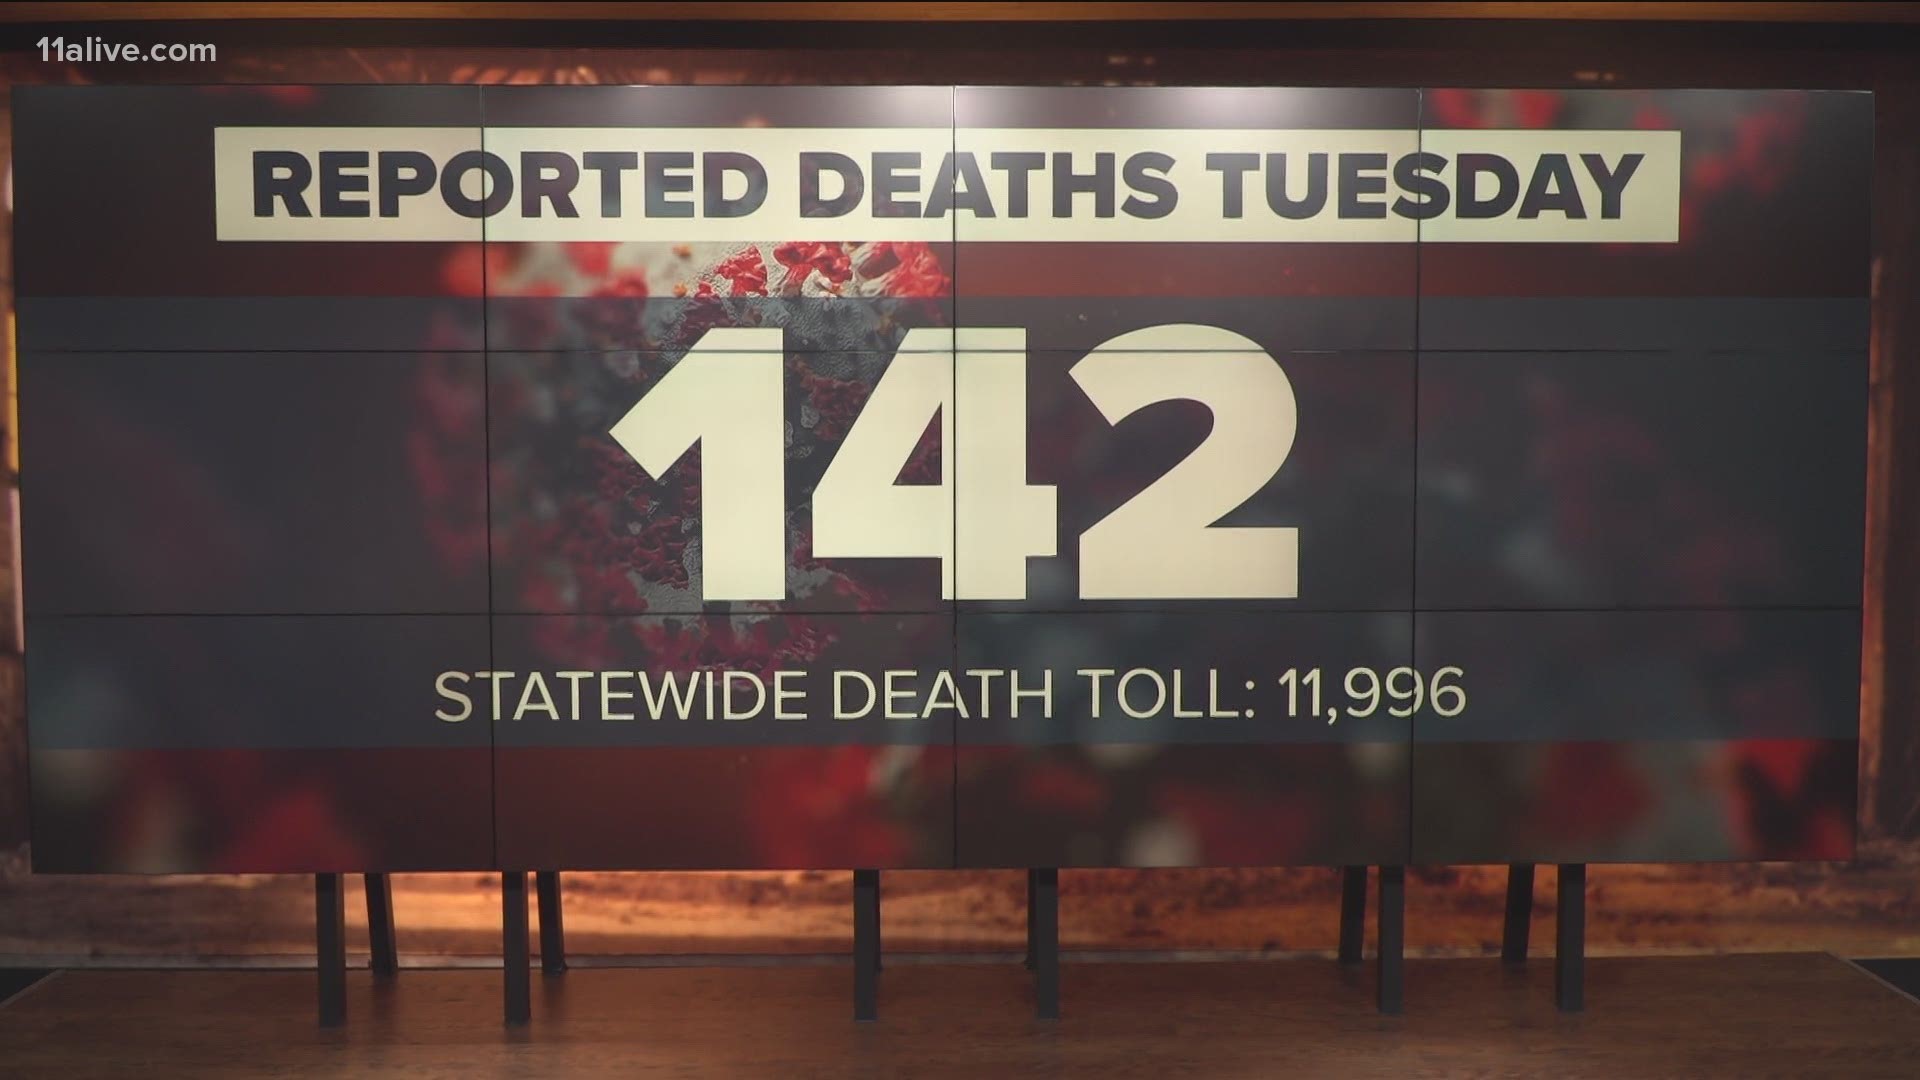 Though cases are decreasing slightly, deaths and hospitalizations remain near record levels.